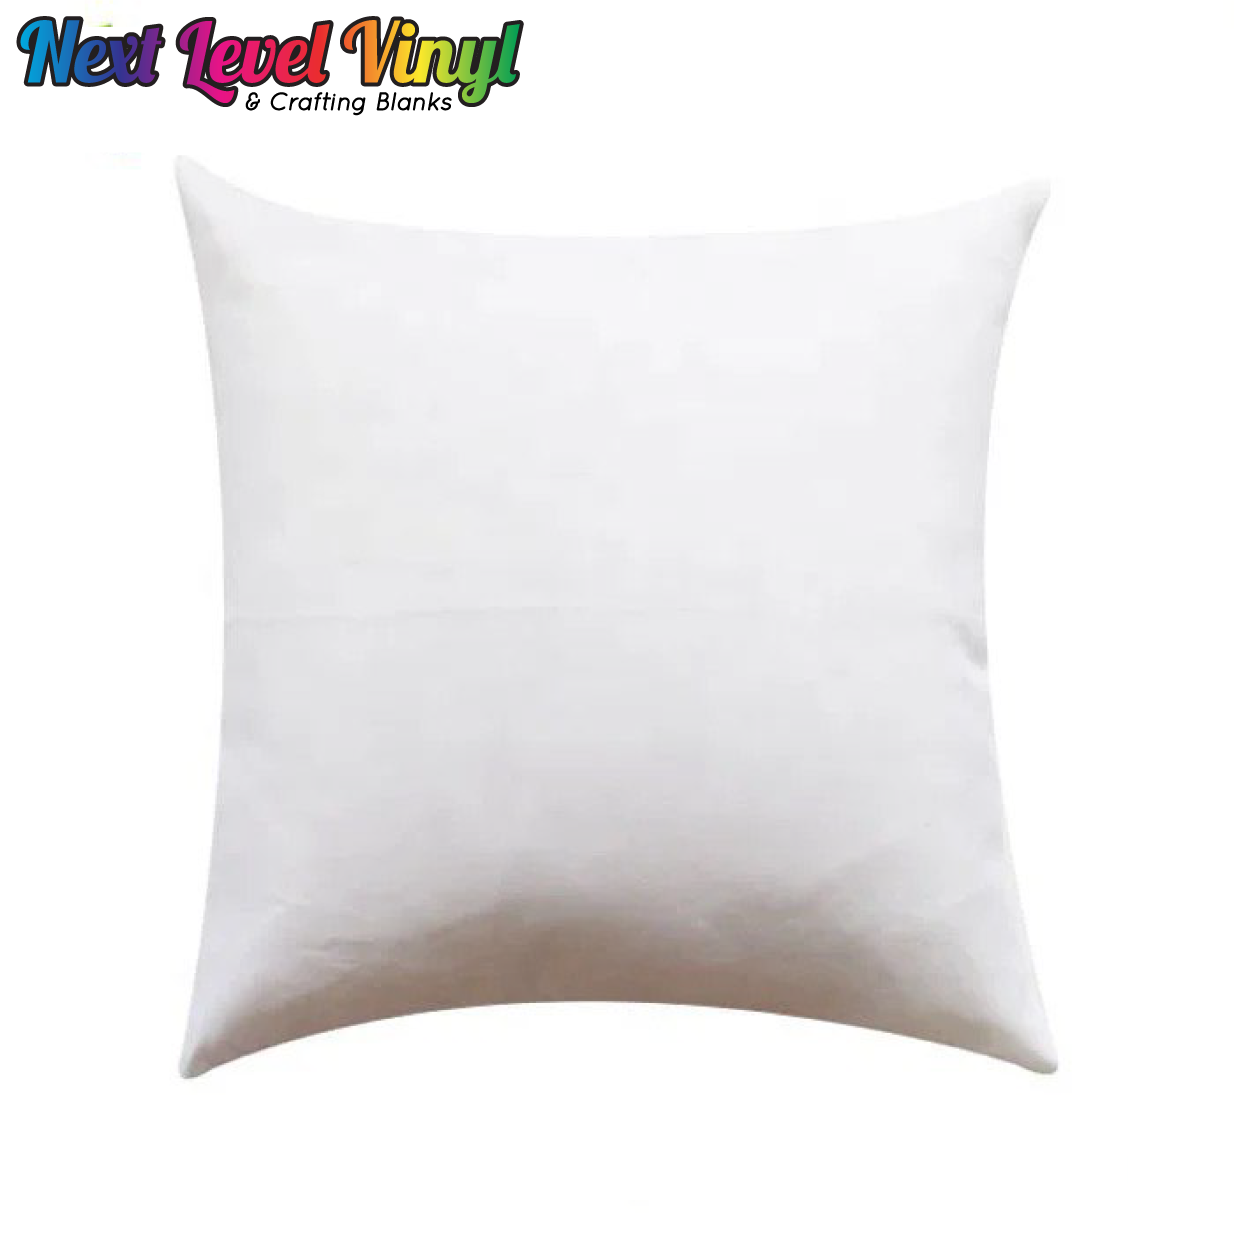 Sublimation Pillow Cases - Next Level Vinyl and Crafting Blanks